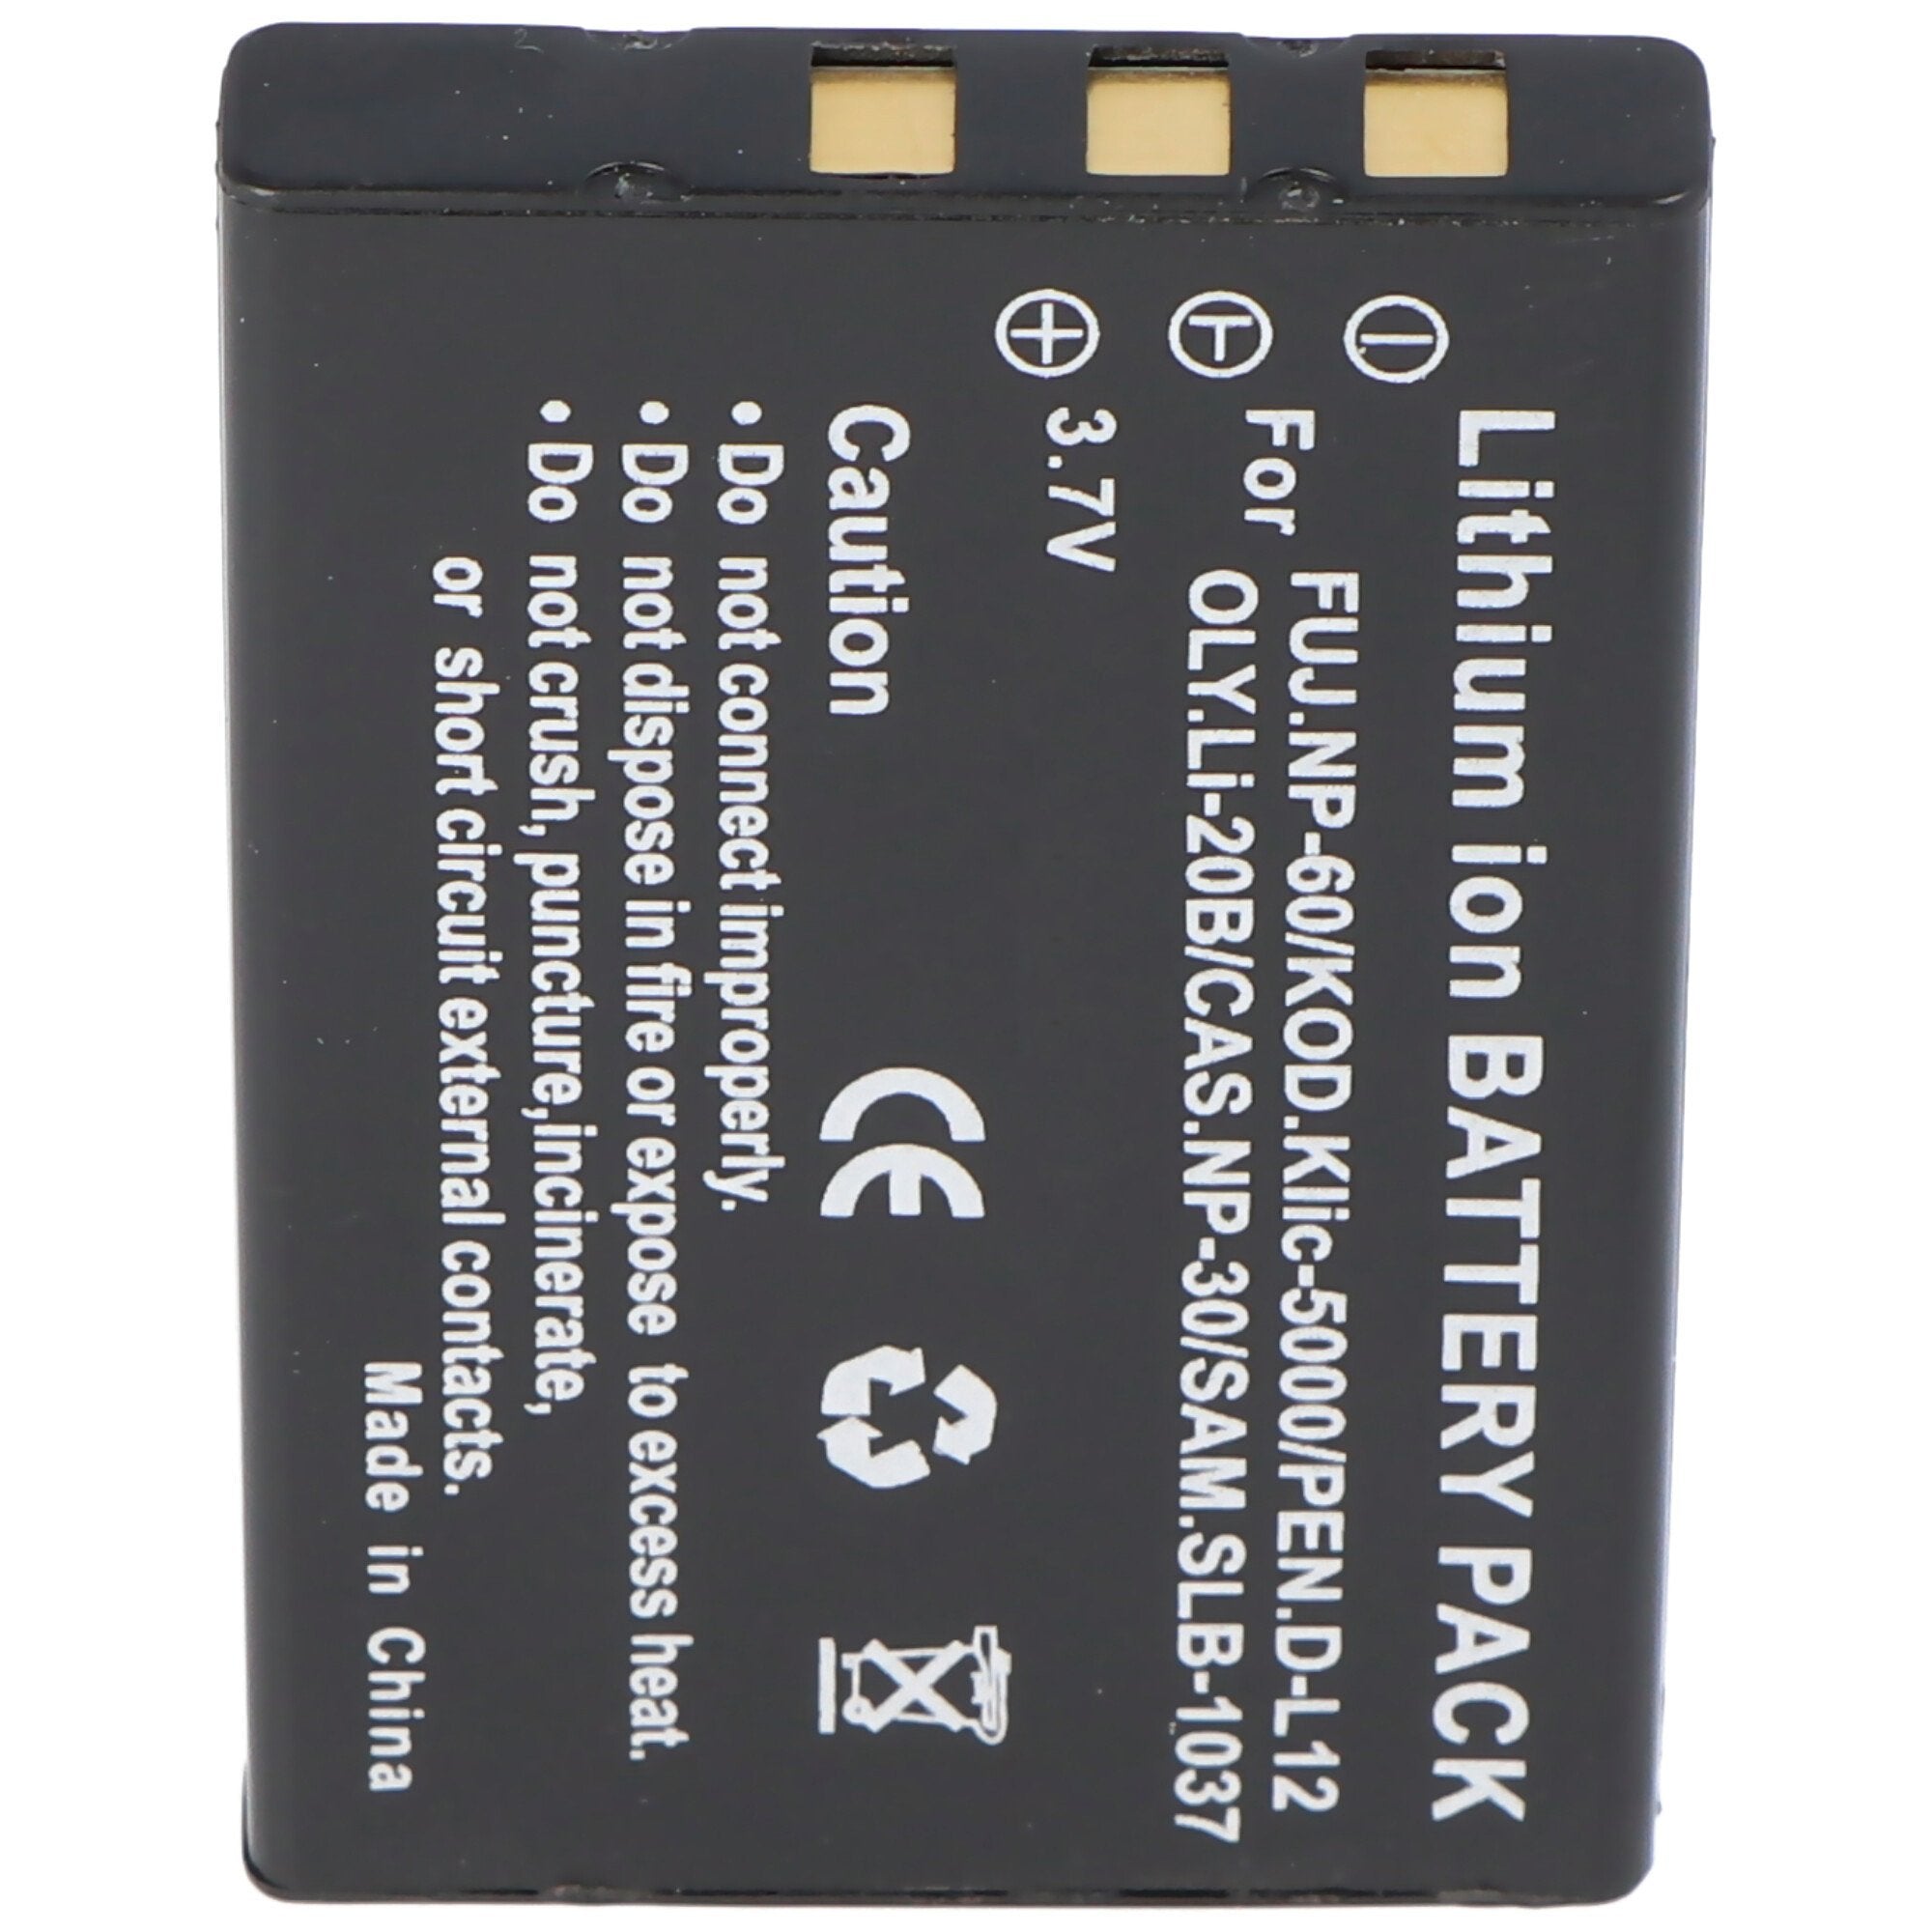 AccuCell battery suitable for Samsung SLB-1137, Digimax V700